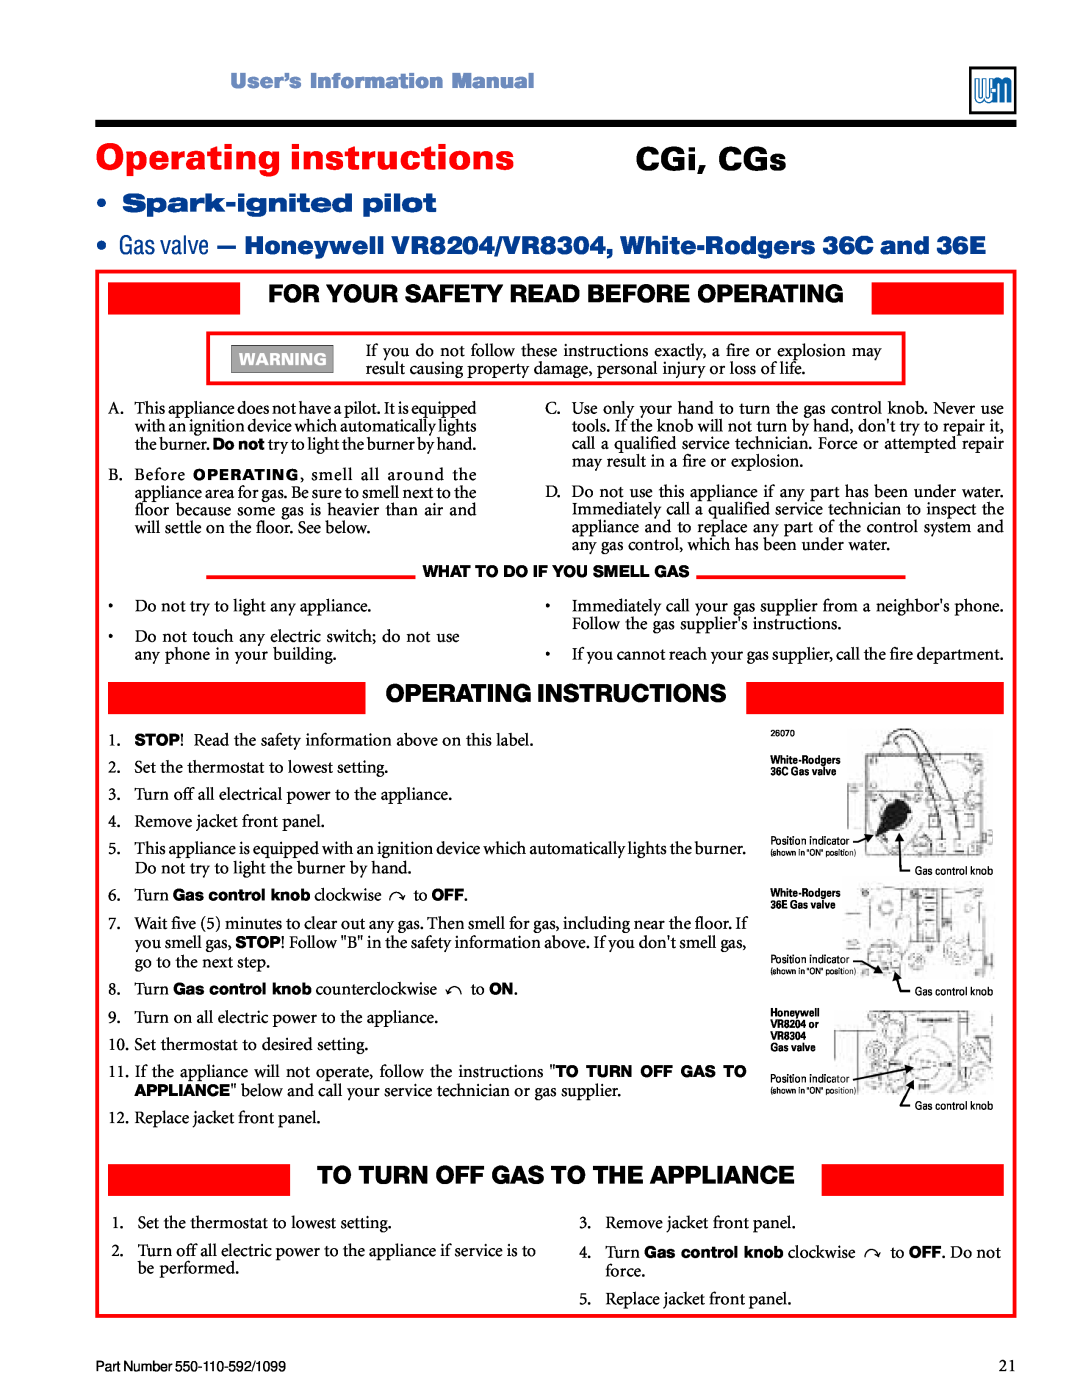 Weil-McLain CGa CGi, CGs, For Your Safety Read Before Operating, To Turn Off Gas To The Appliance, UserísInformationManual 